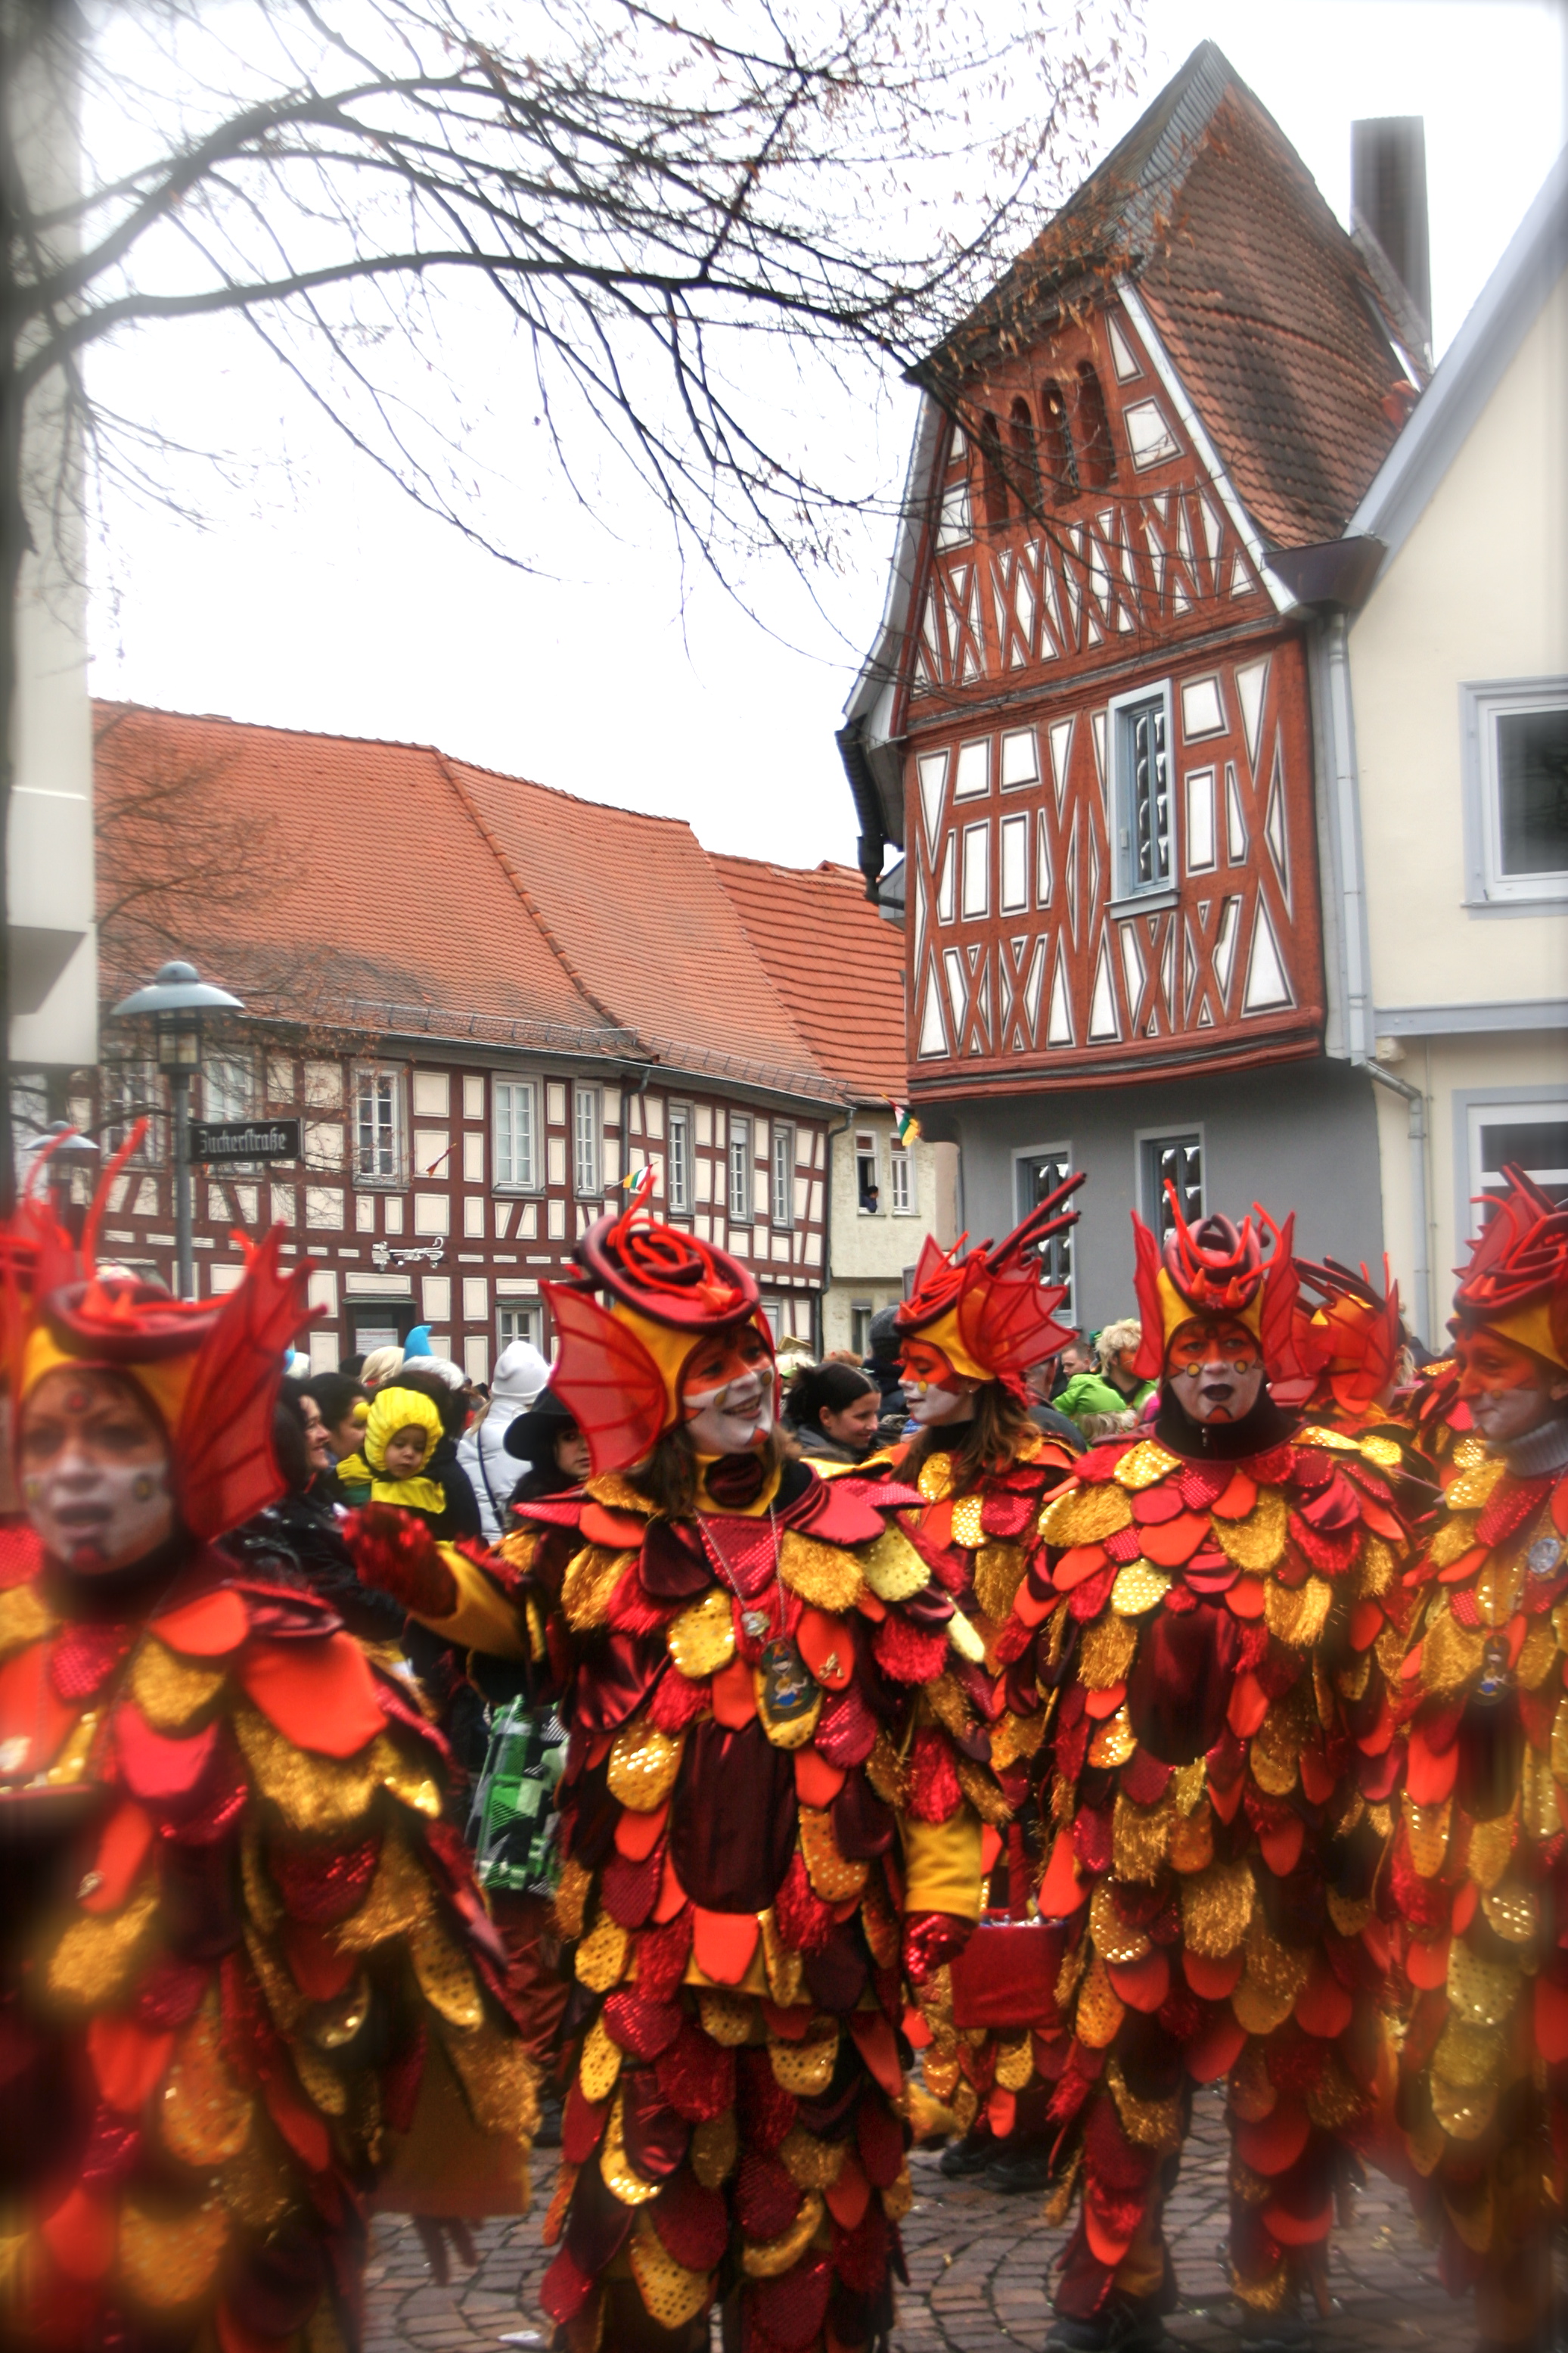 Holy Fasching Karneval: Part One (the kids)